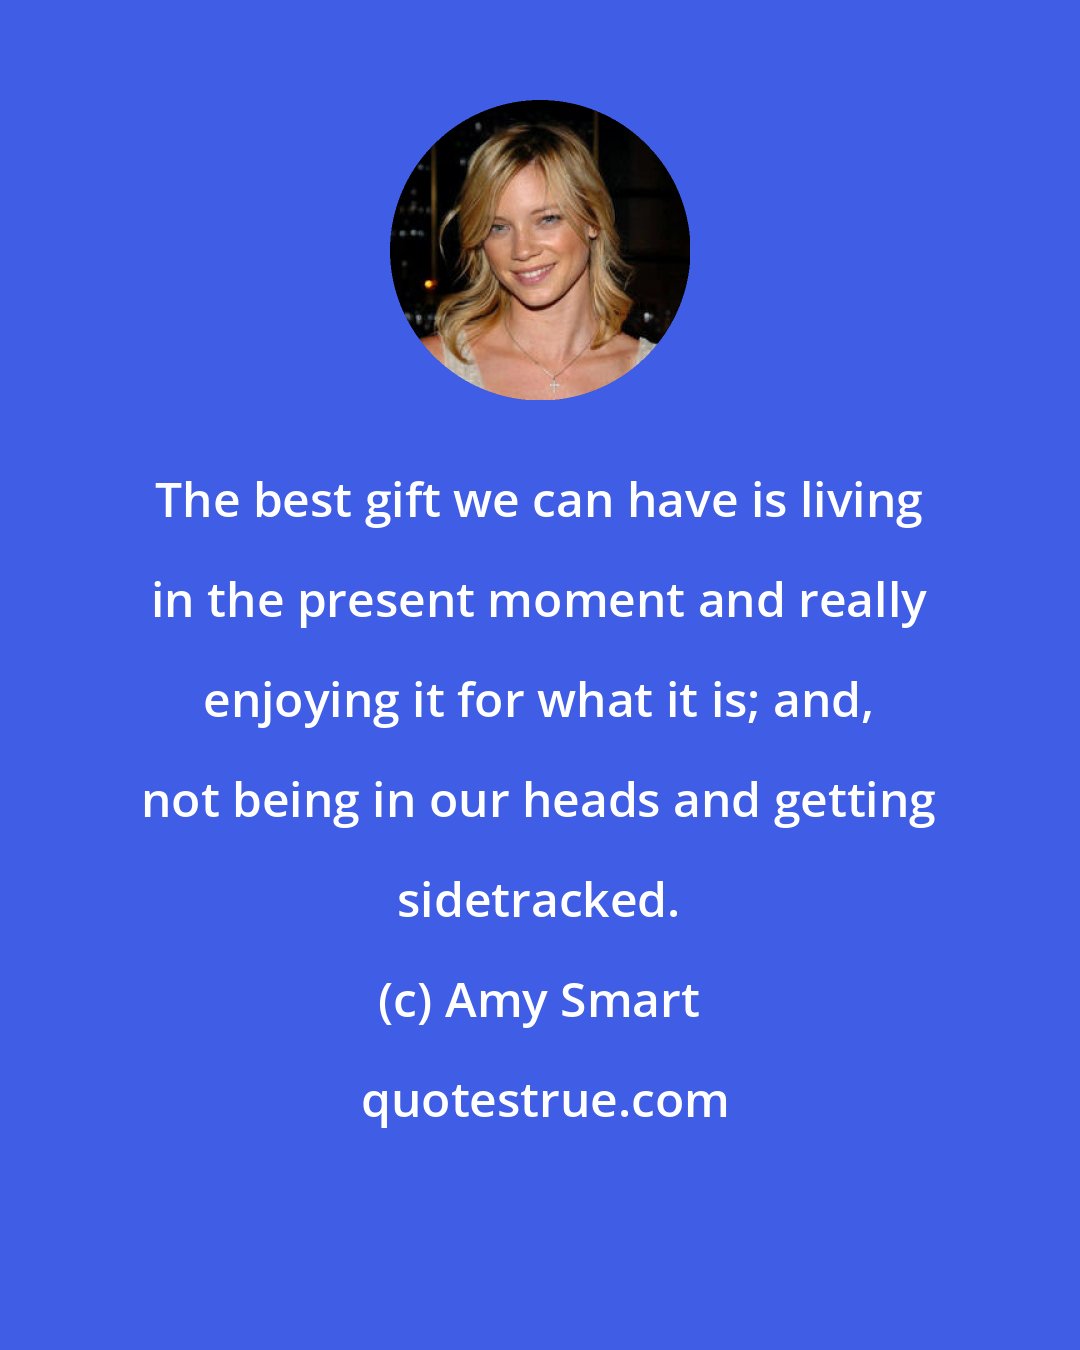 Amy Smart: The best gift we can have is living in the present moment and really enjoying it for what it is; and, not being in our heads and getting sidetracked.